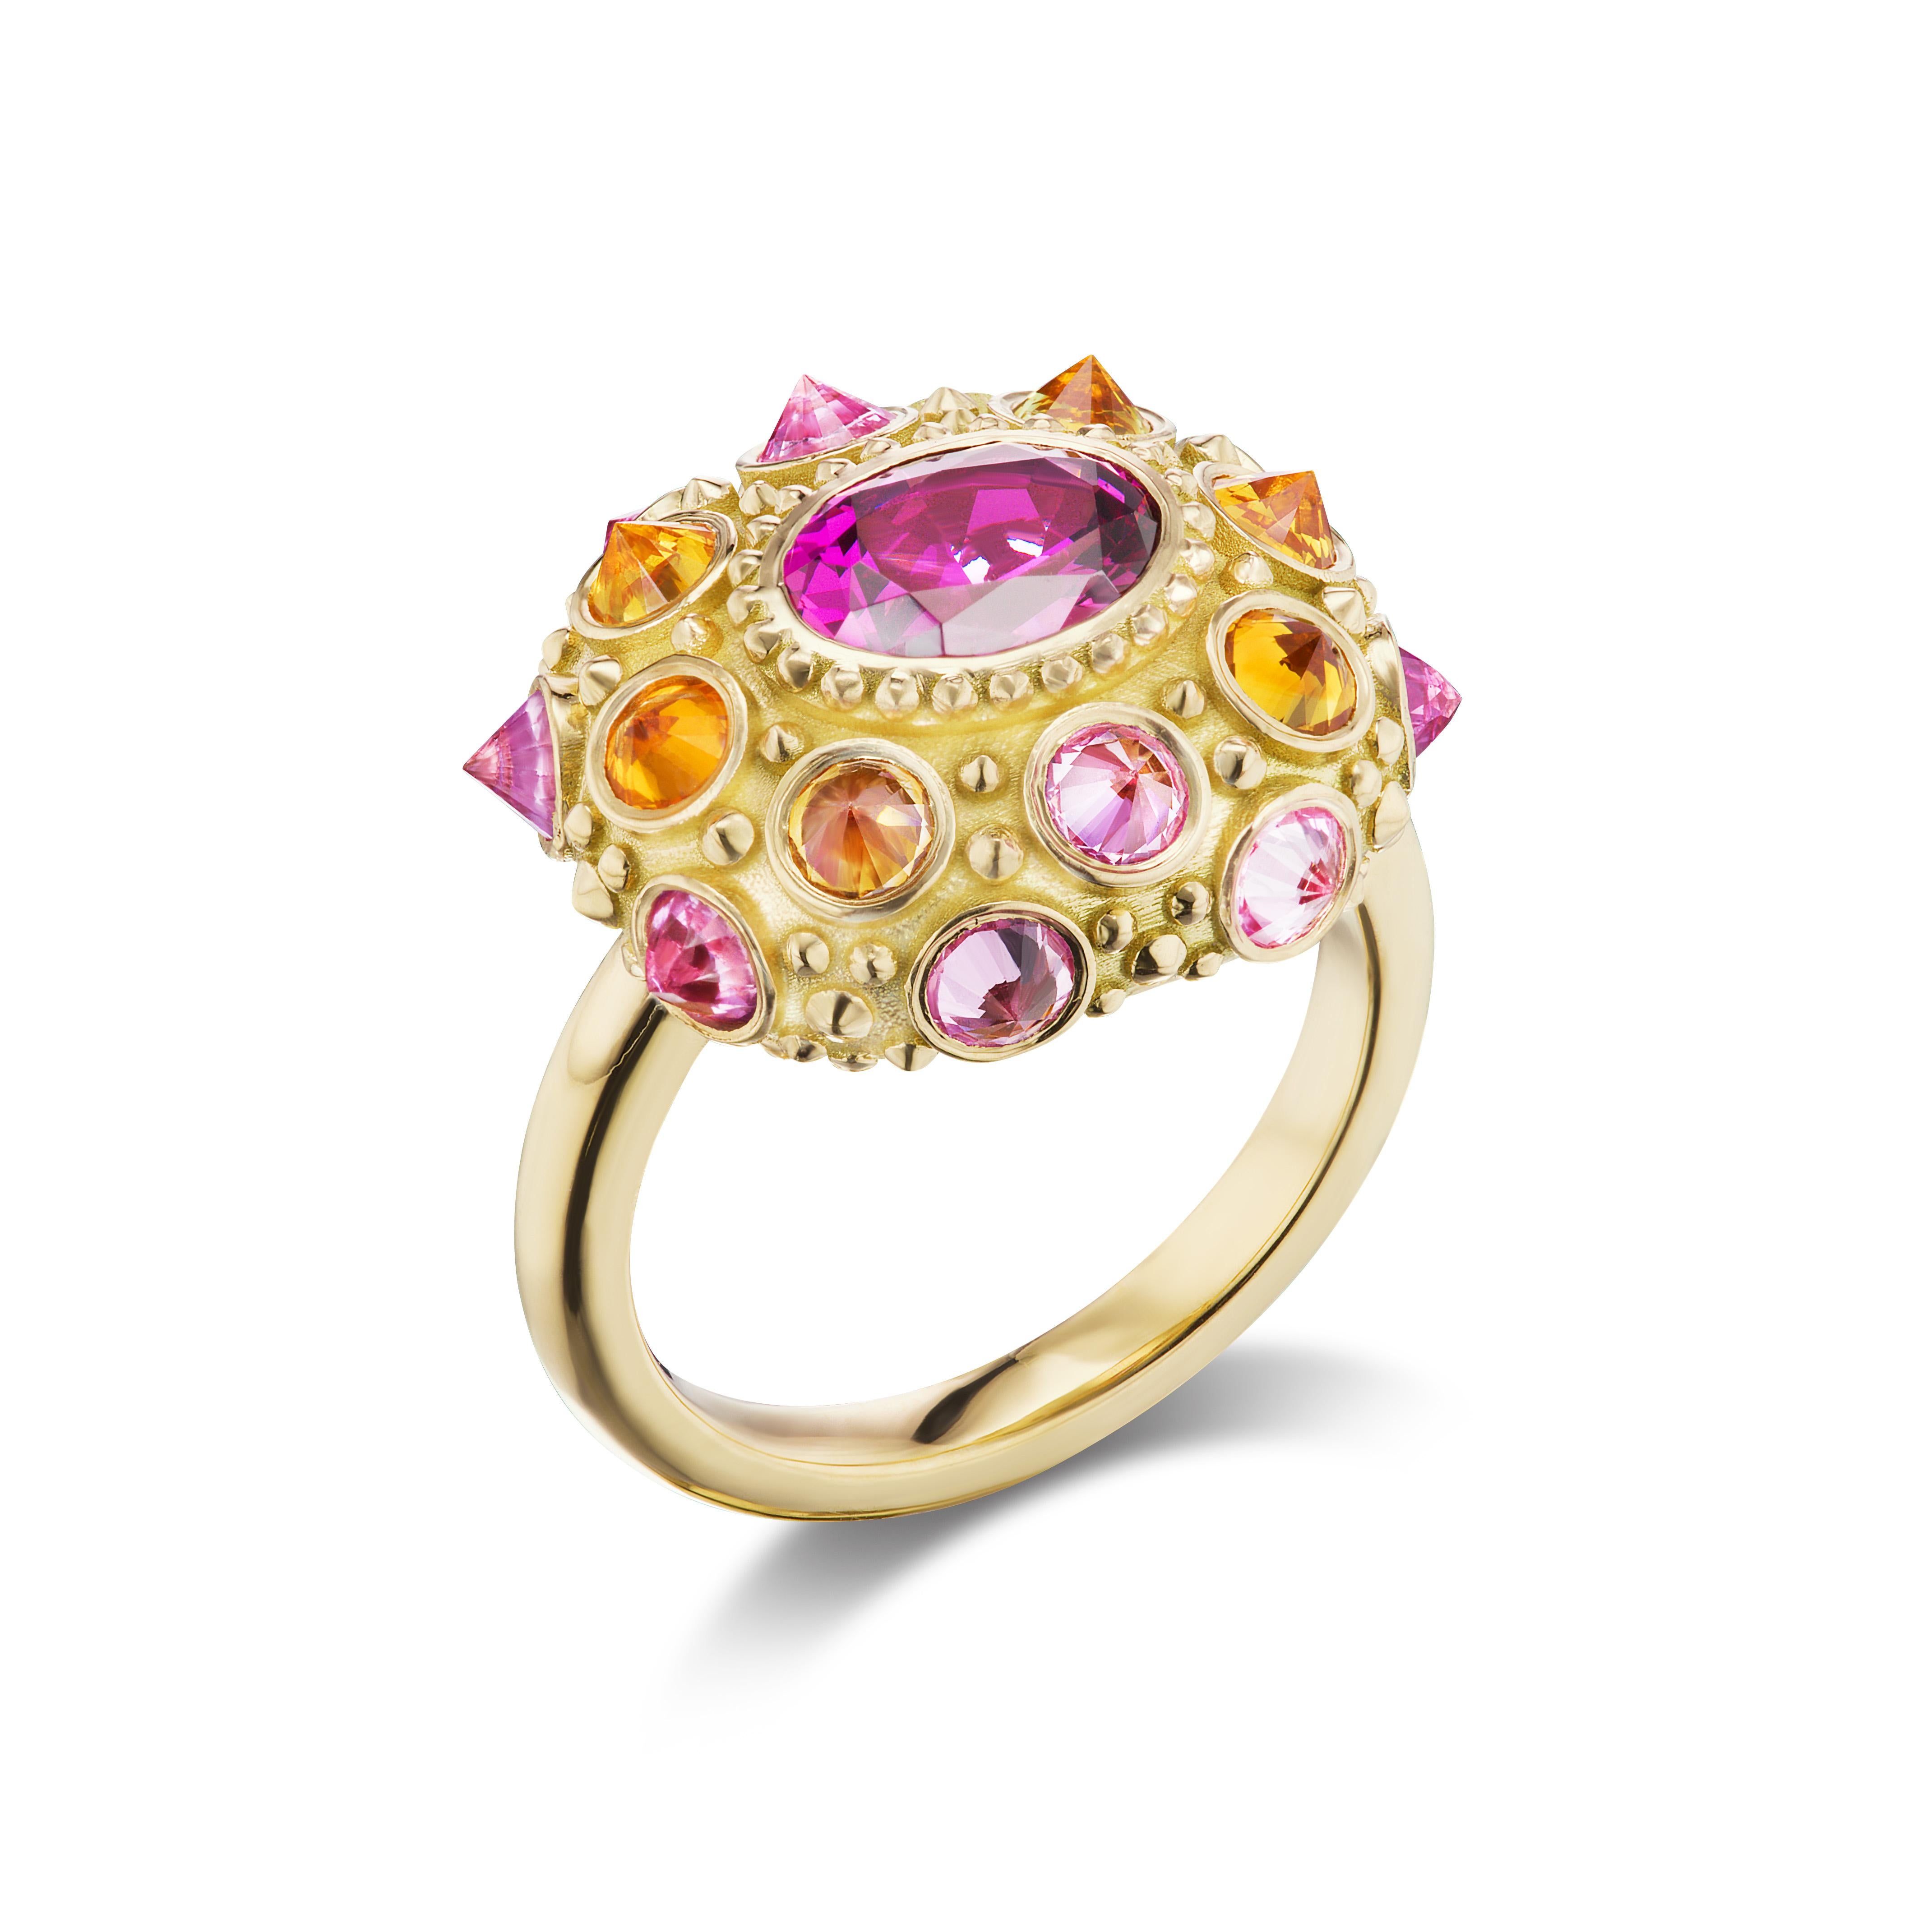 18k Yellow Gold, 1.43 Rhodalite Garnets, 1.50ct Pink Sapphires, and .90CT Orange Sapphires

Design Inspiration

AnaKatarina's 'Pretty in Pink' ring reminds her of effervescent joy. Her favorite color combination is fuschia, orange, and red. The